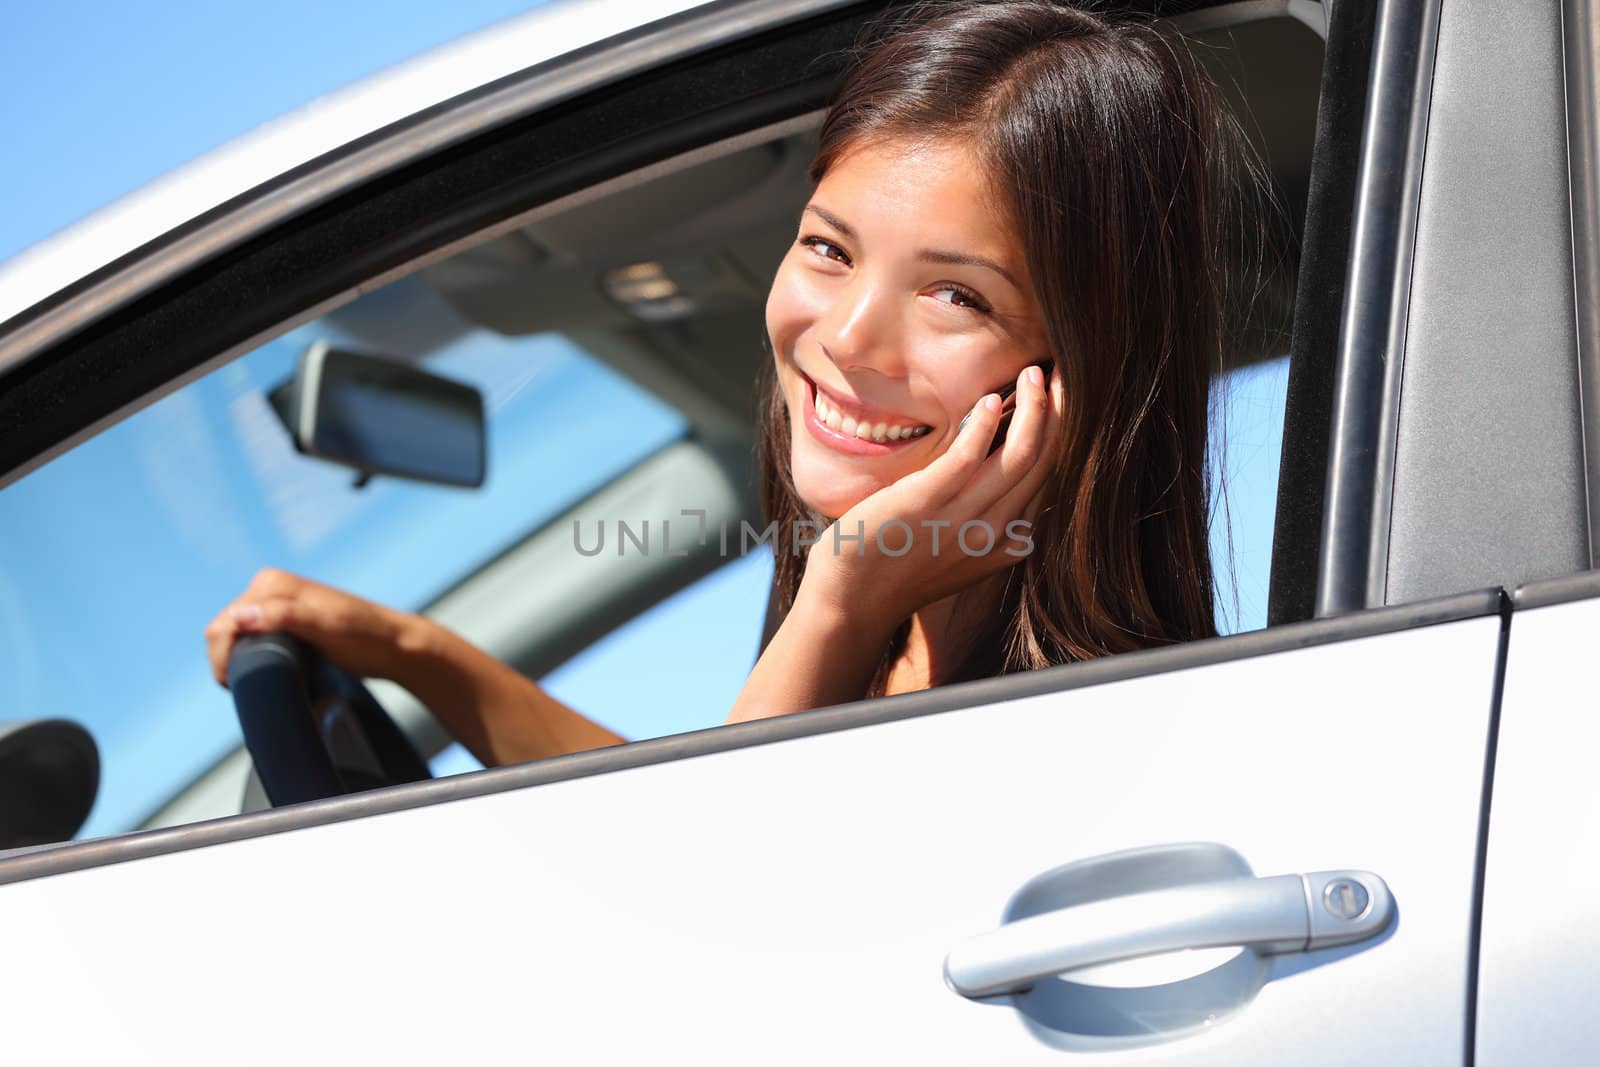 Car woman using smart phone while driving in car. Beautiful young woman talking on mobile phone smiling happy looking at camera. Mixed race eurasian woman.